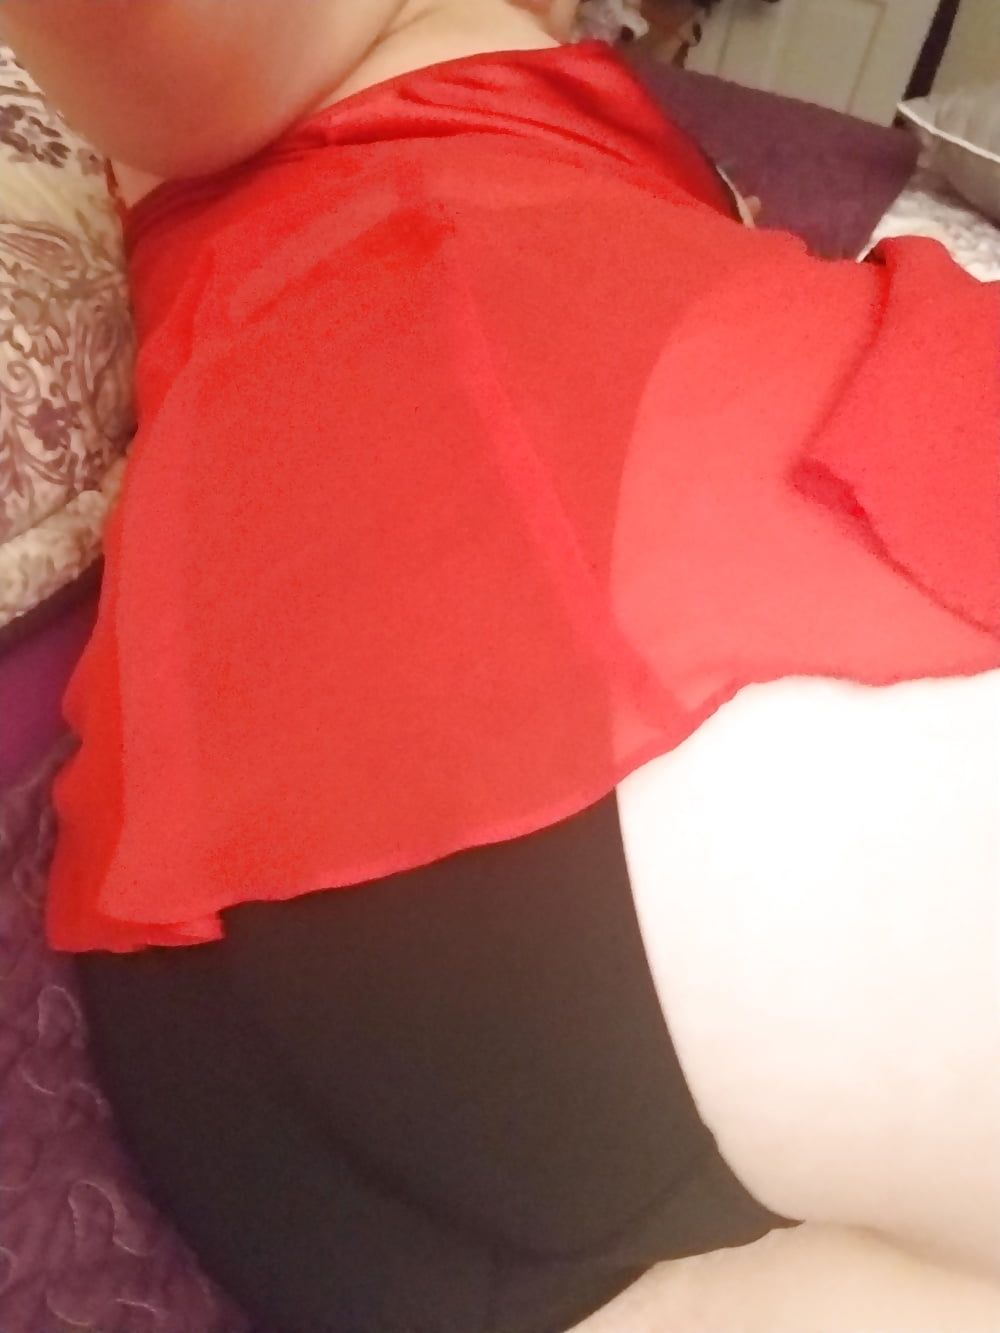 Red lingerie, big boobs and a butt plug....  #25